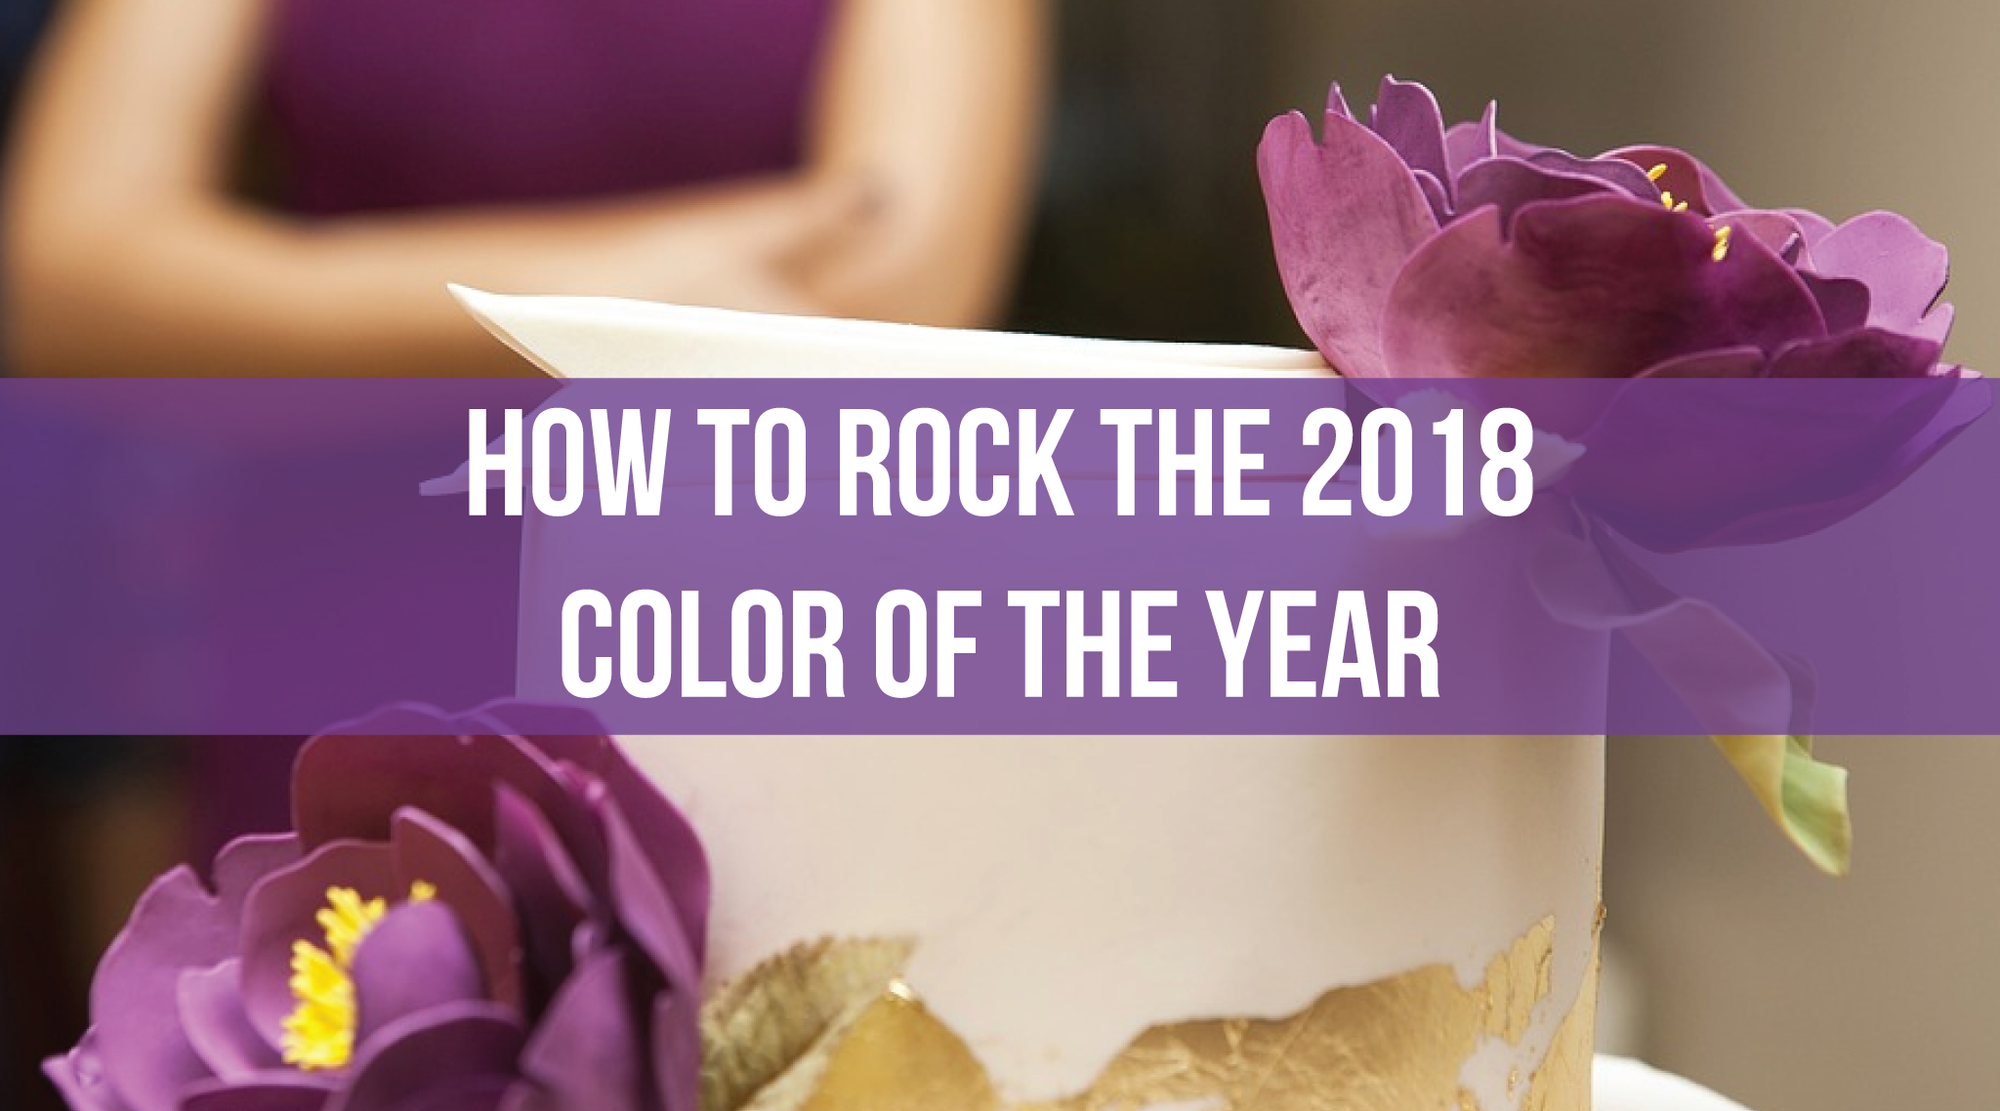 How to Rock the 2018 Color of the Year